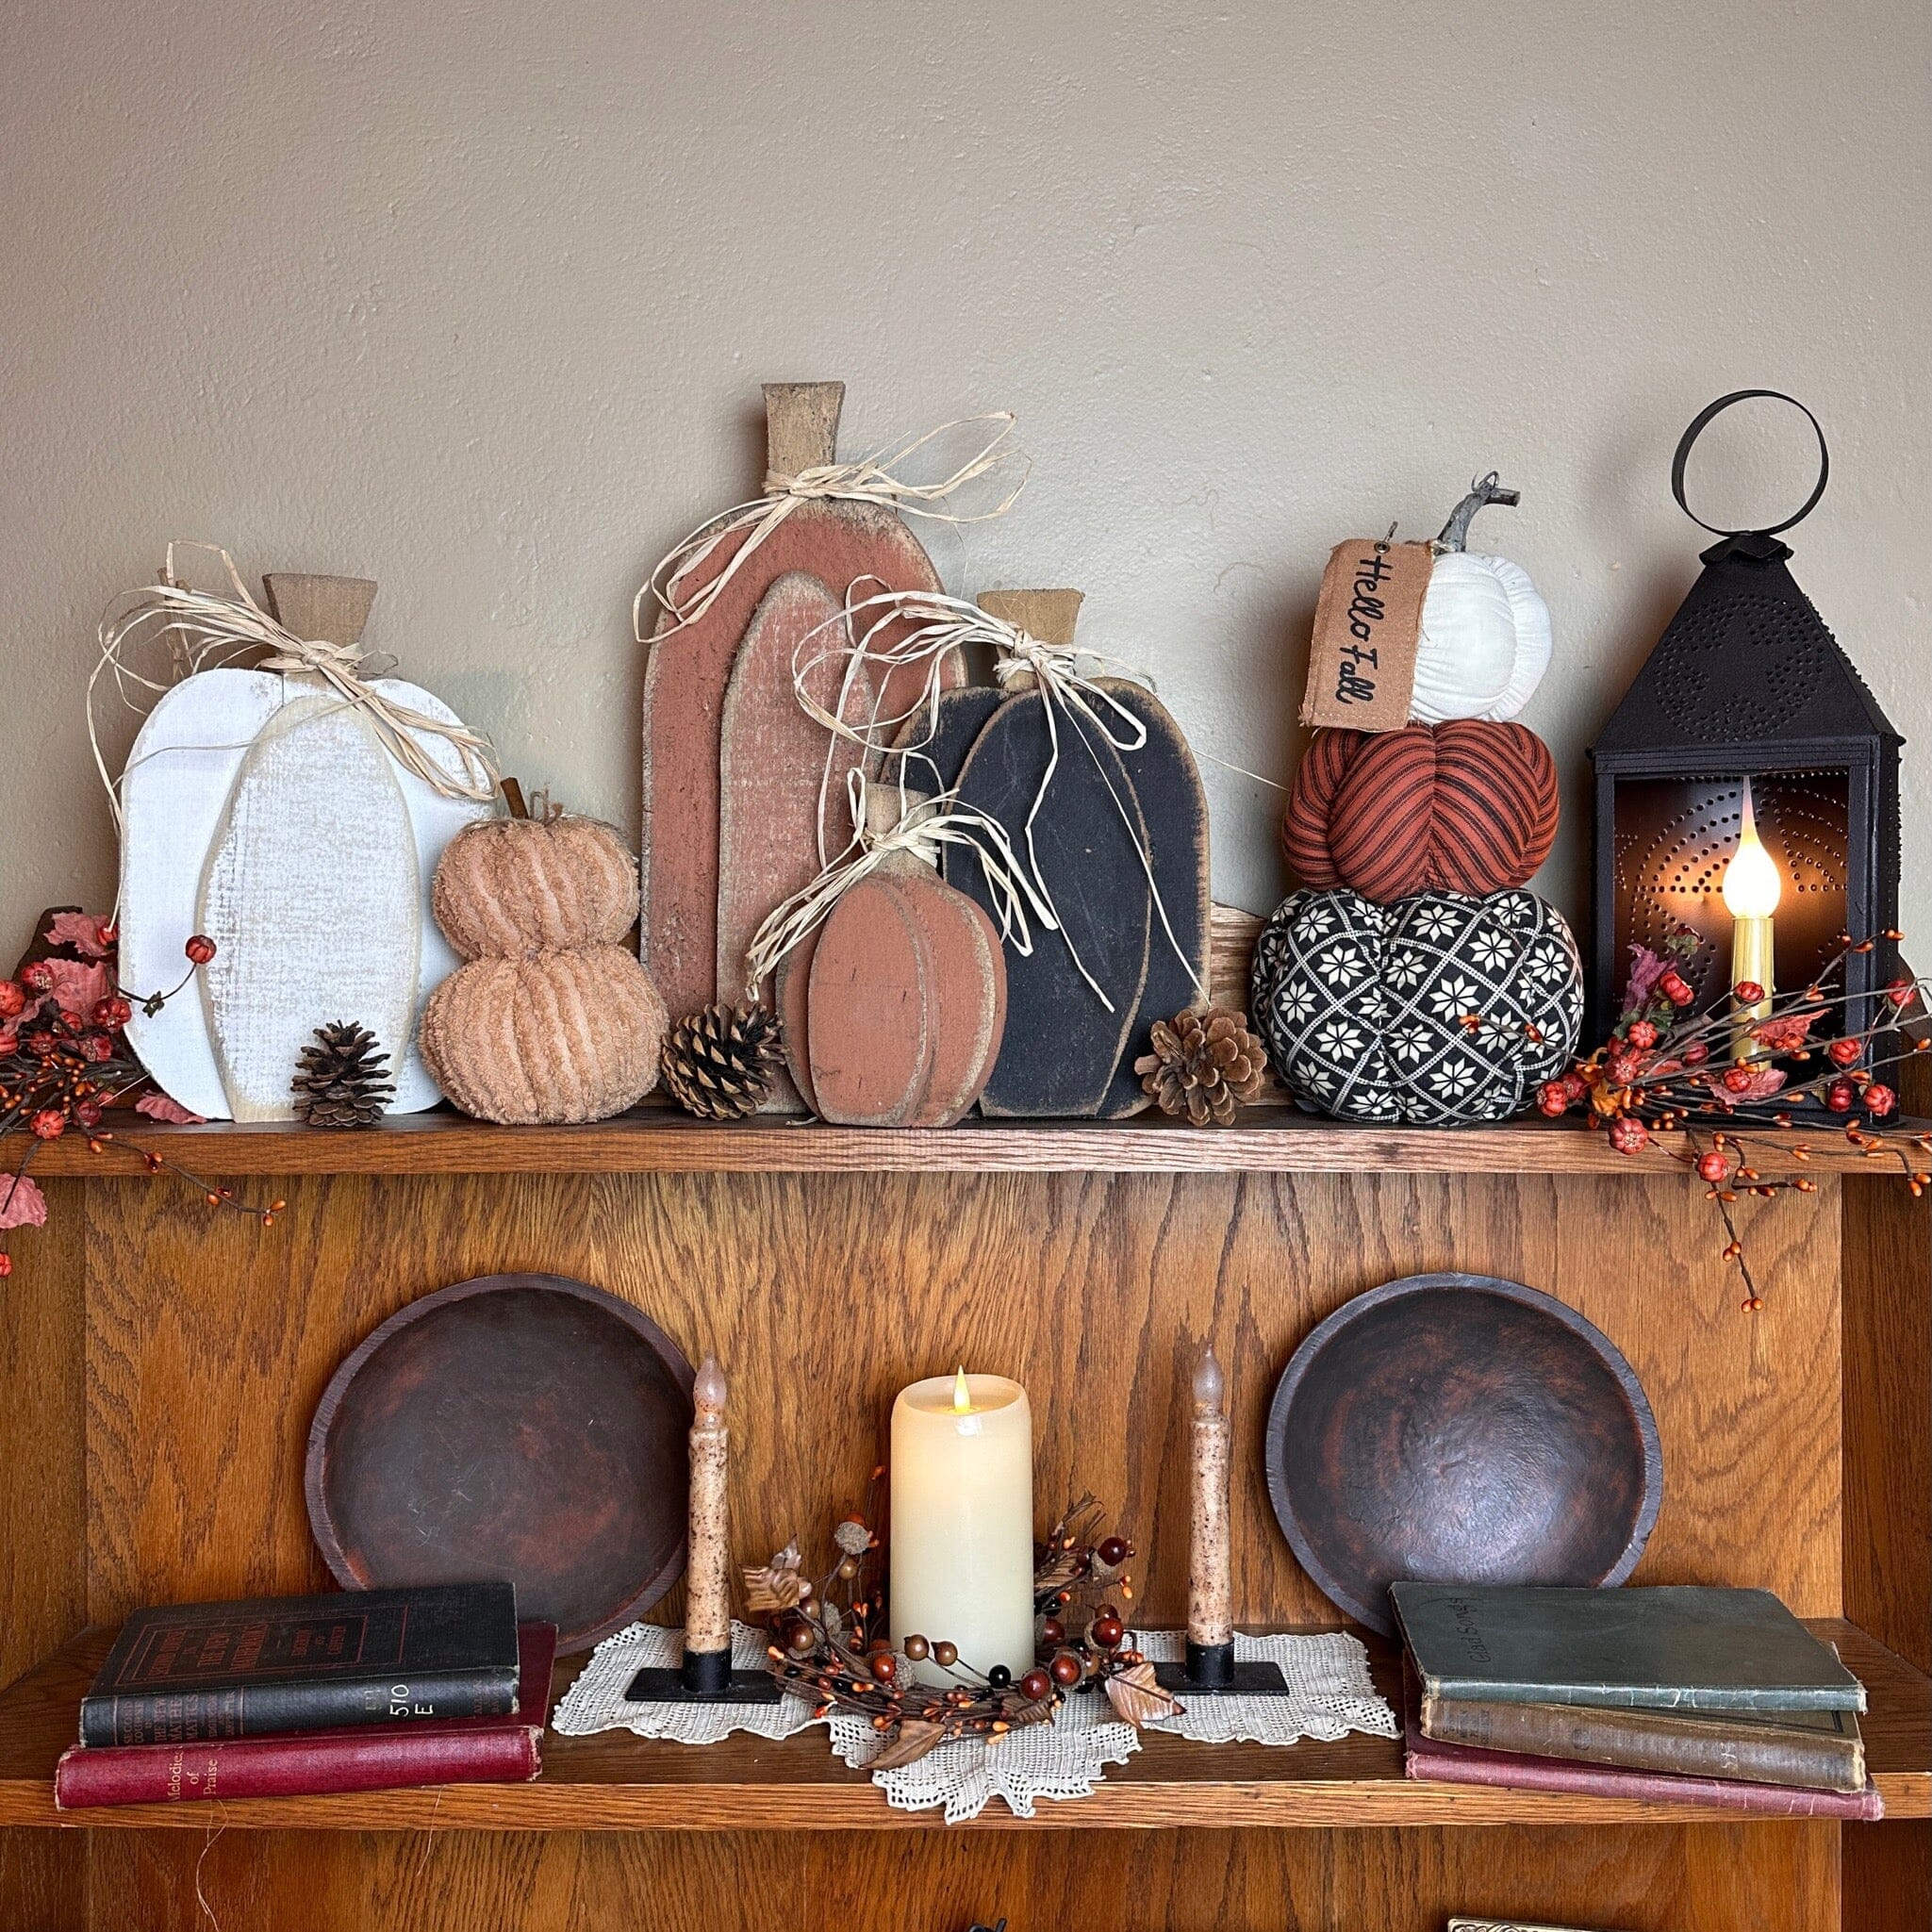 Embracing Rustic Charm: Rustic Fall Table Decor Ideas for a Cozy